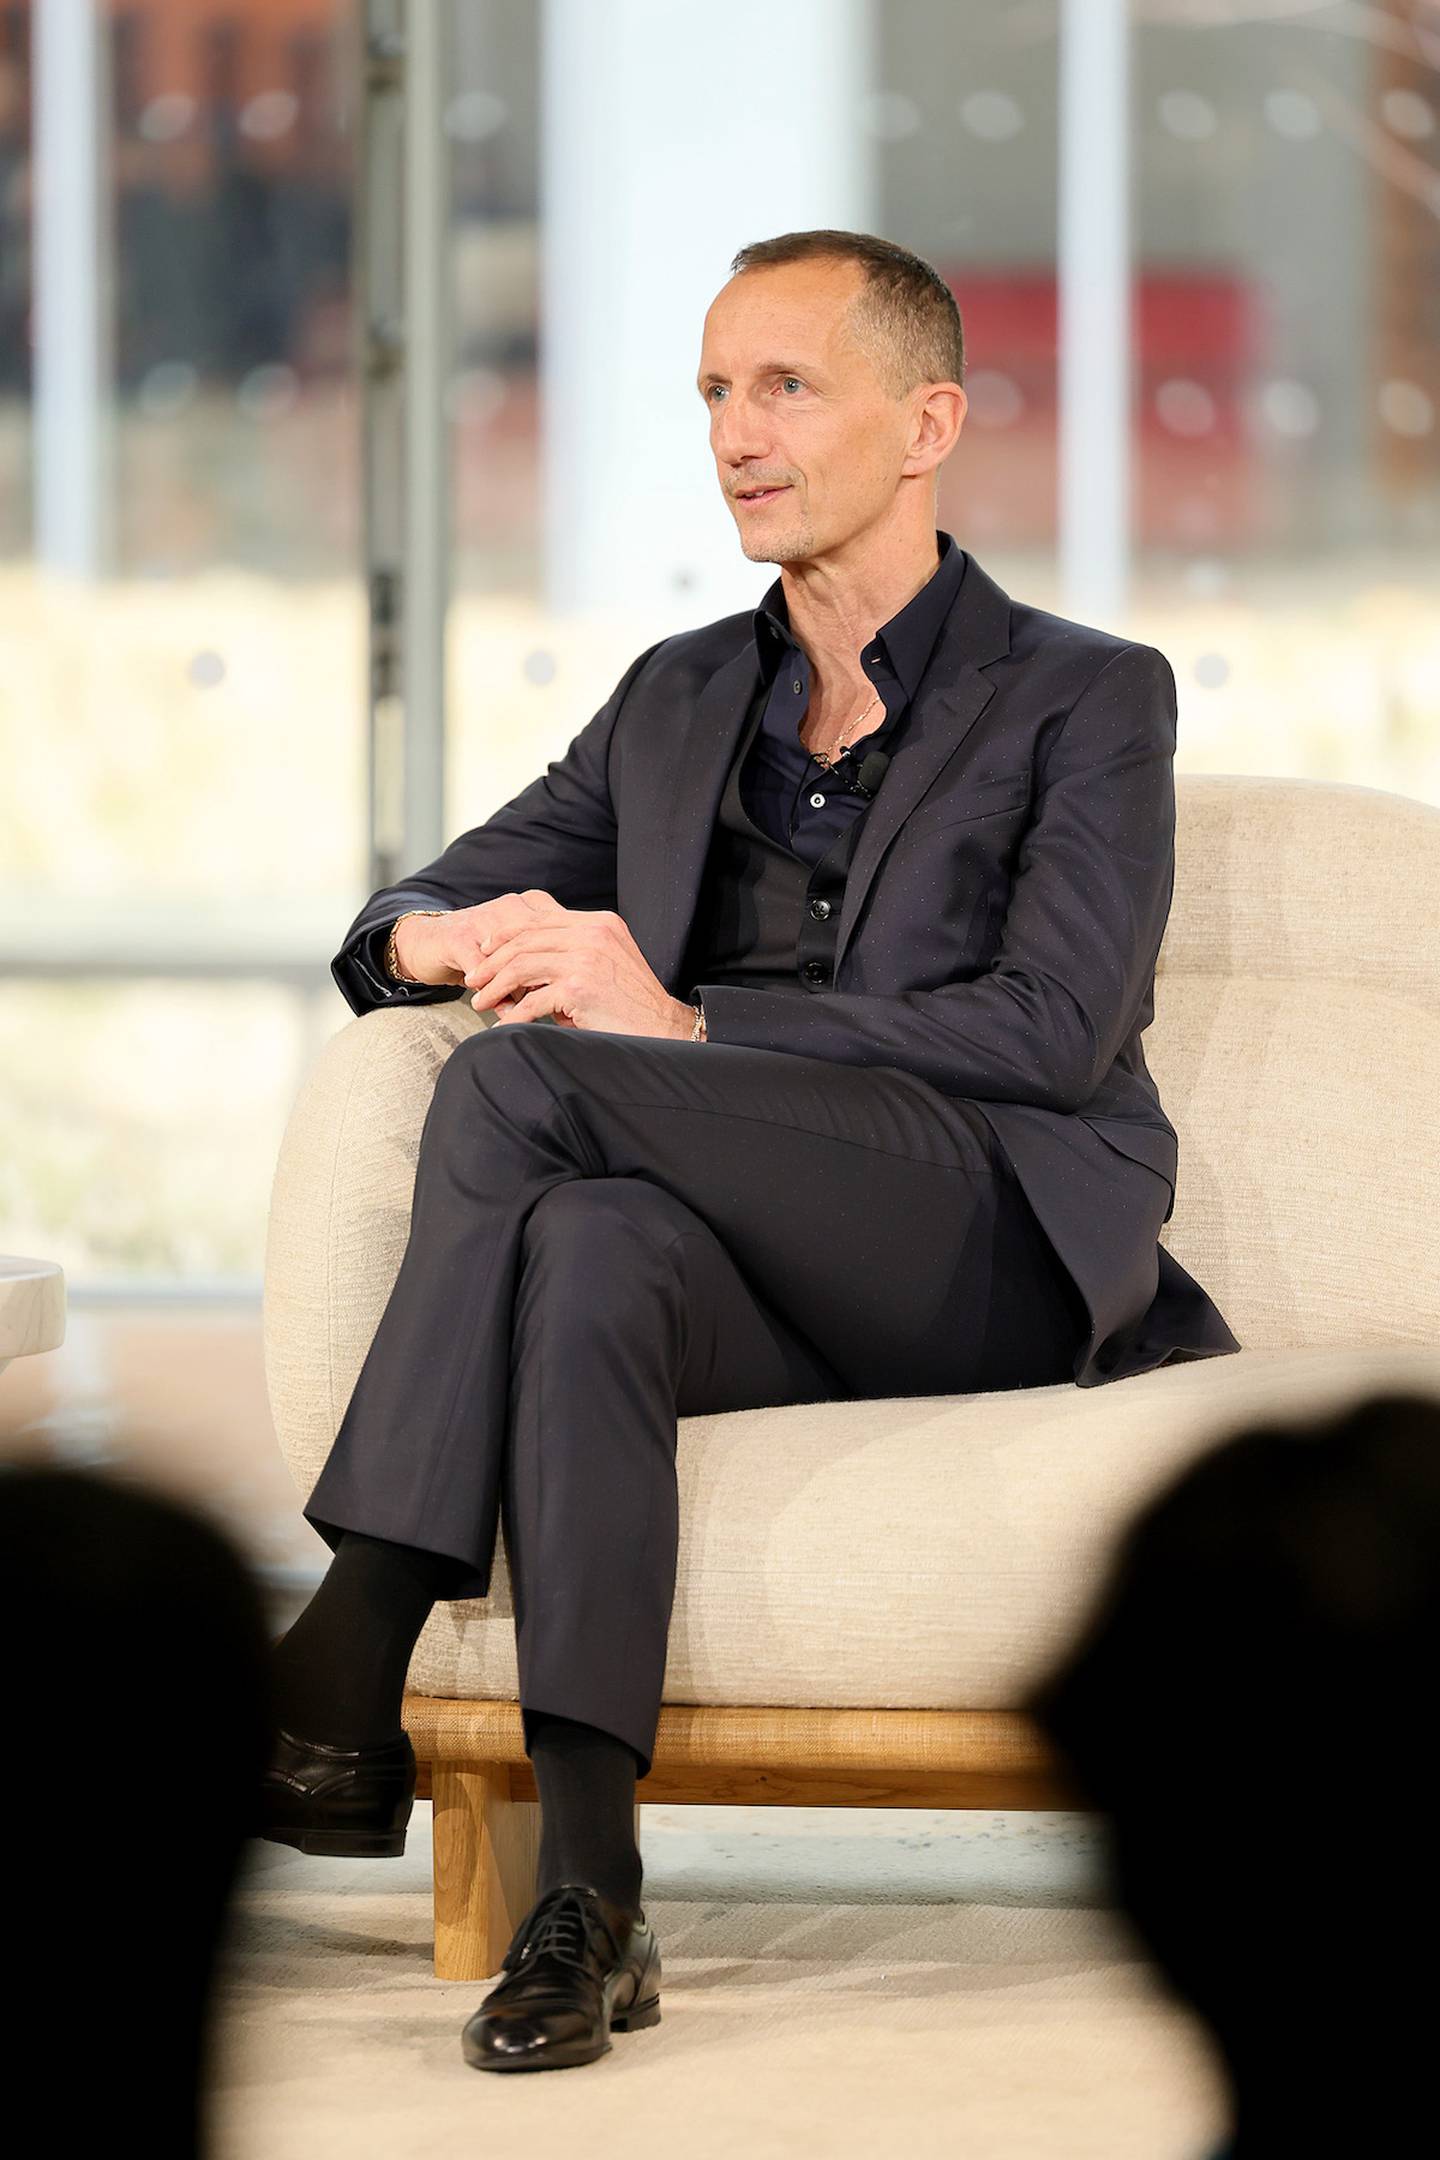 Robert Triefus, Chief Executive, Gucci Vault and Metaverse Ventures and Senior Executive Vice President, Corporate and Brand Strategy, Gucci, on stage at The BoF Professional Summit.